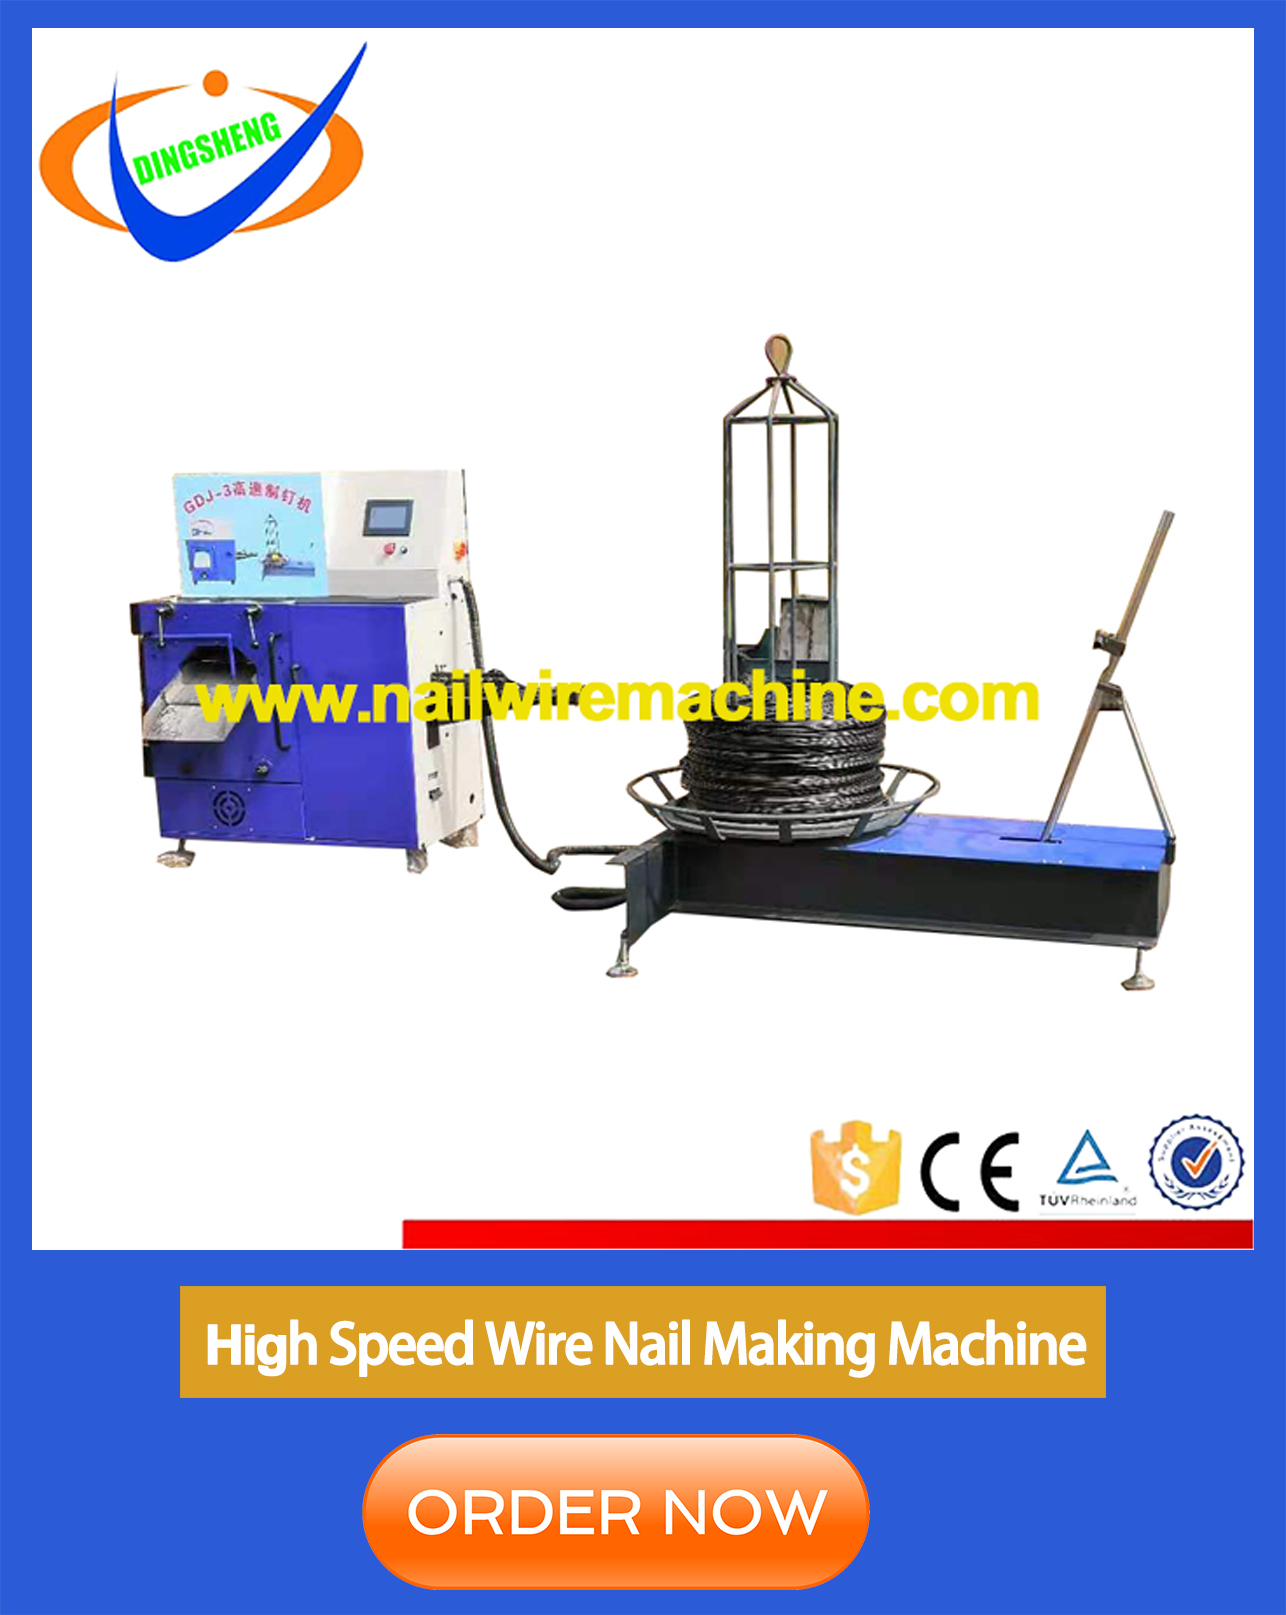 Cheap high speed automatic <a href=https://www.nailwiremachine.com/Automatic-steel-wire-nail-making-machine-Z94-1C-p.html target='_blank'>steel wire nail machine</a> factory